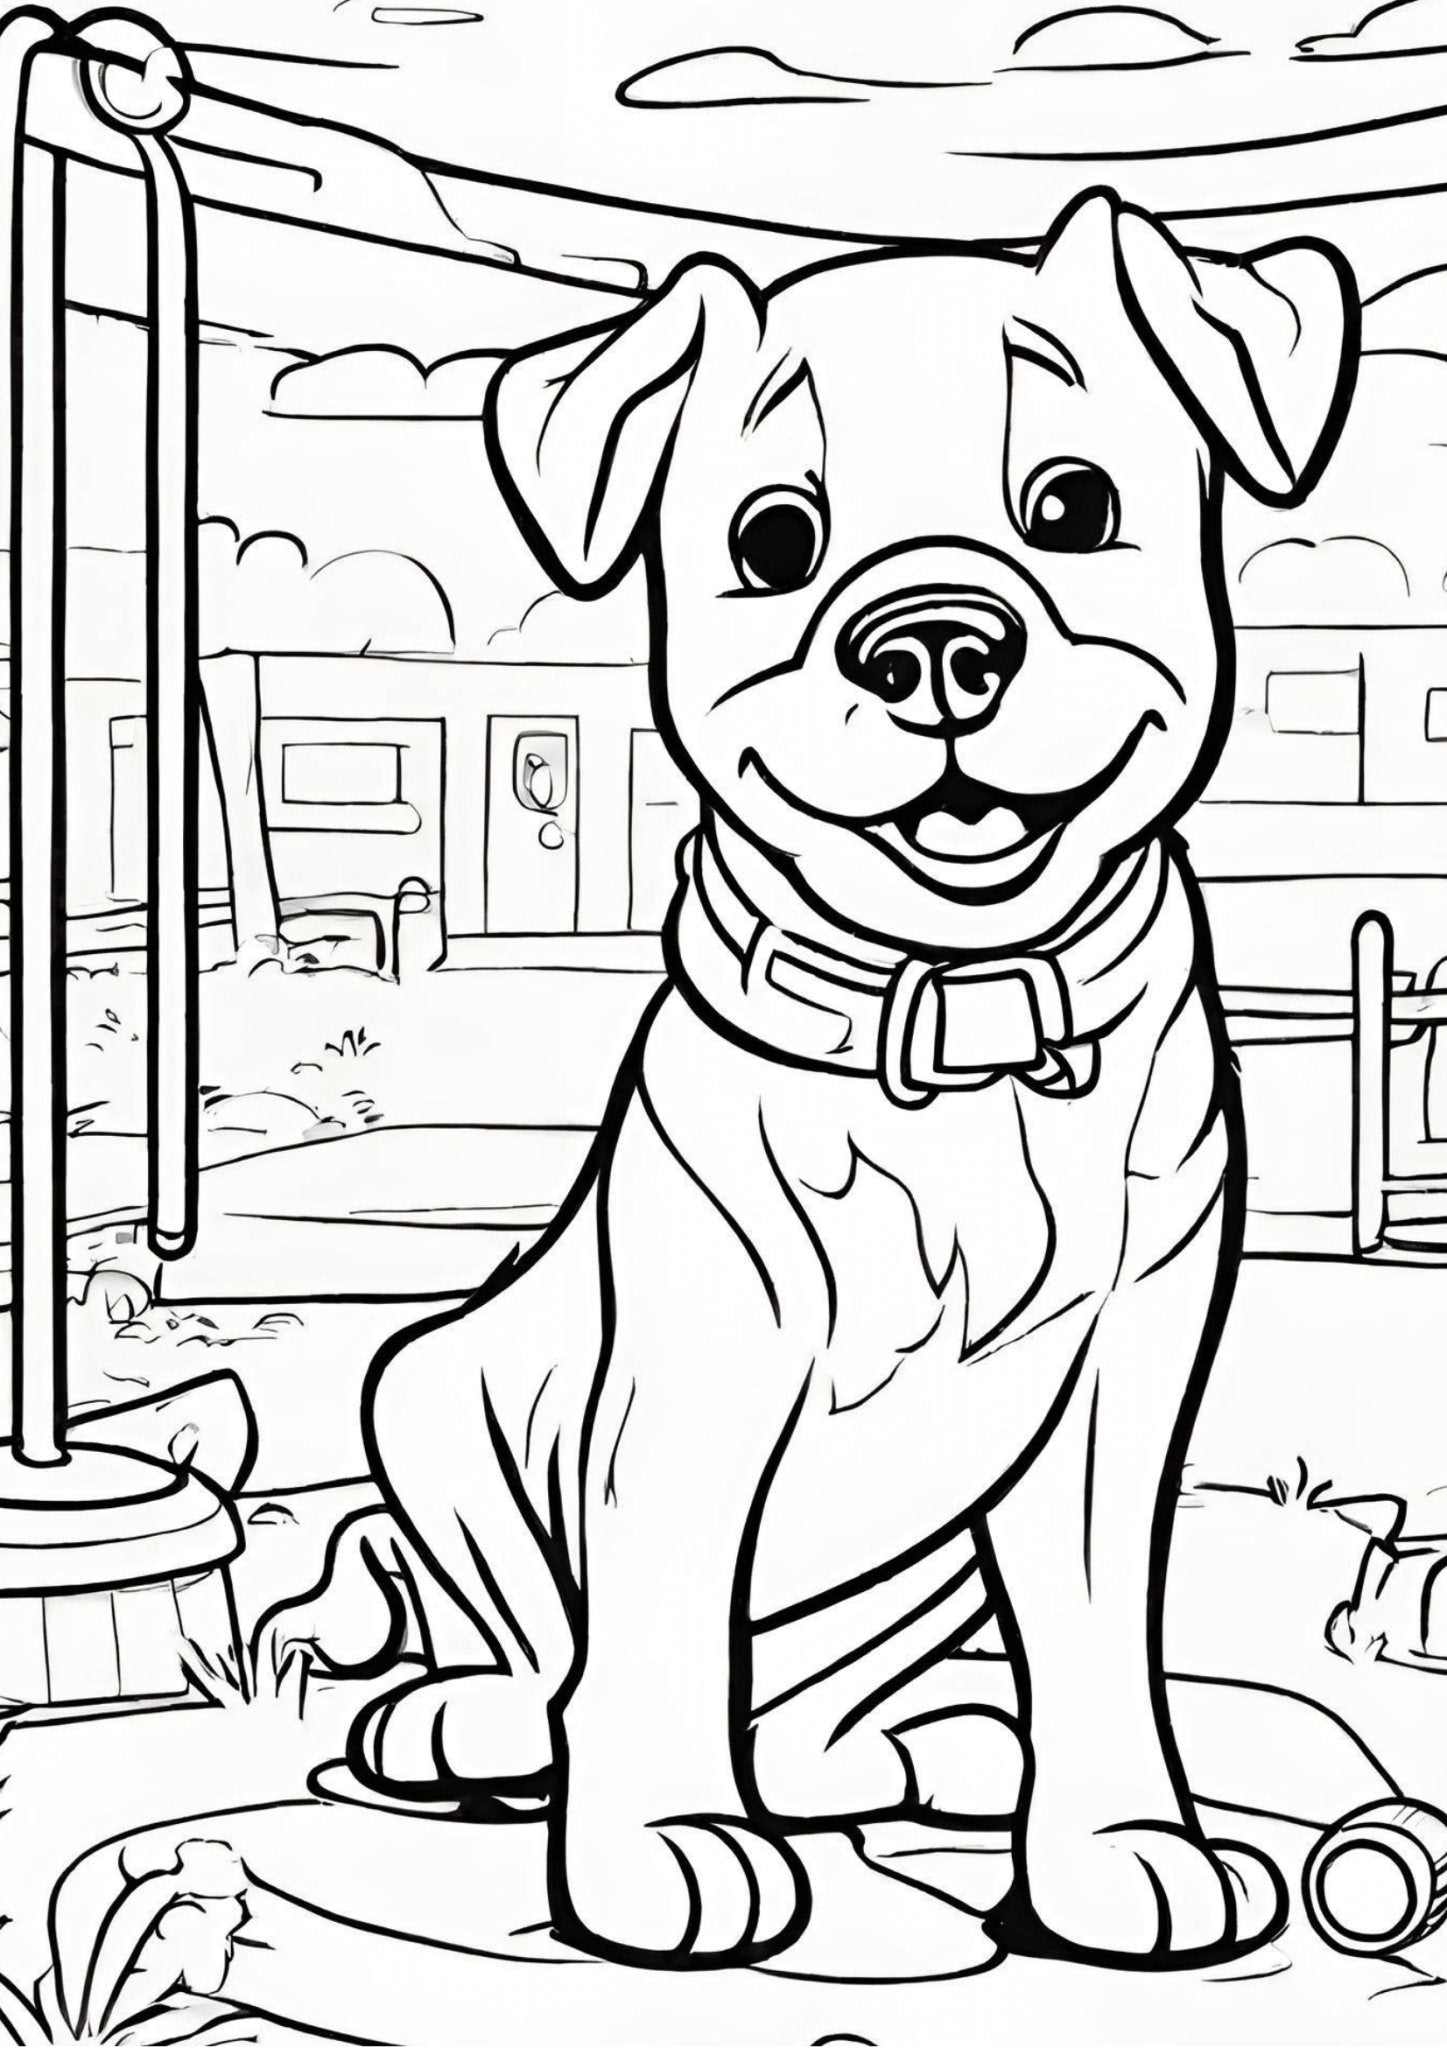 25 Amazing My Cute Dog Coloring Sheets - My Coloring Zone